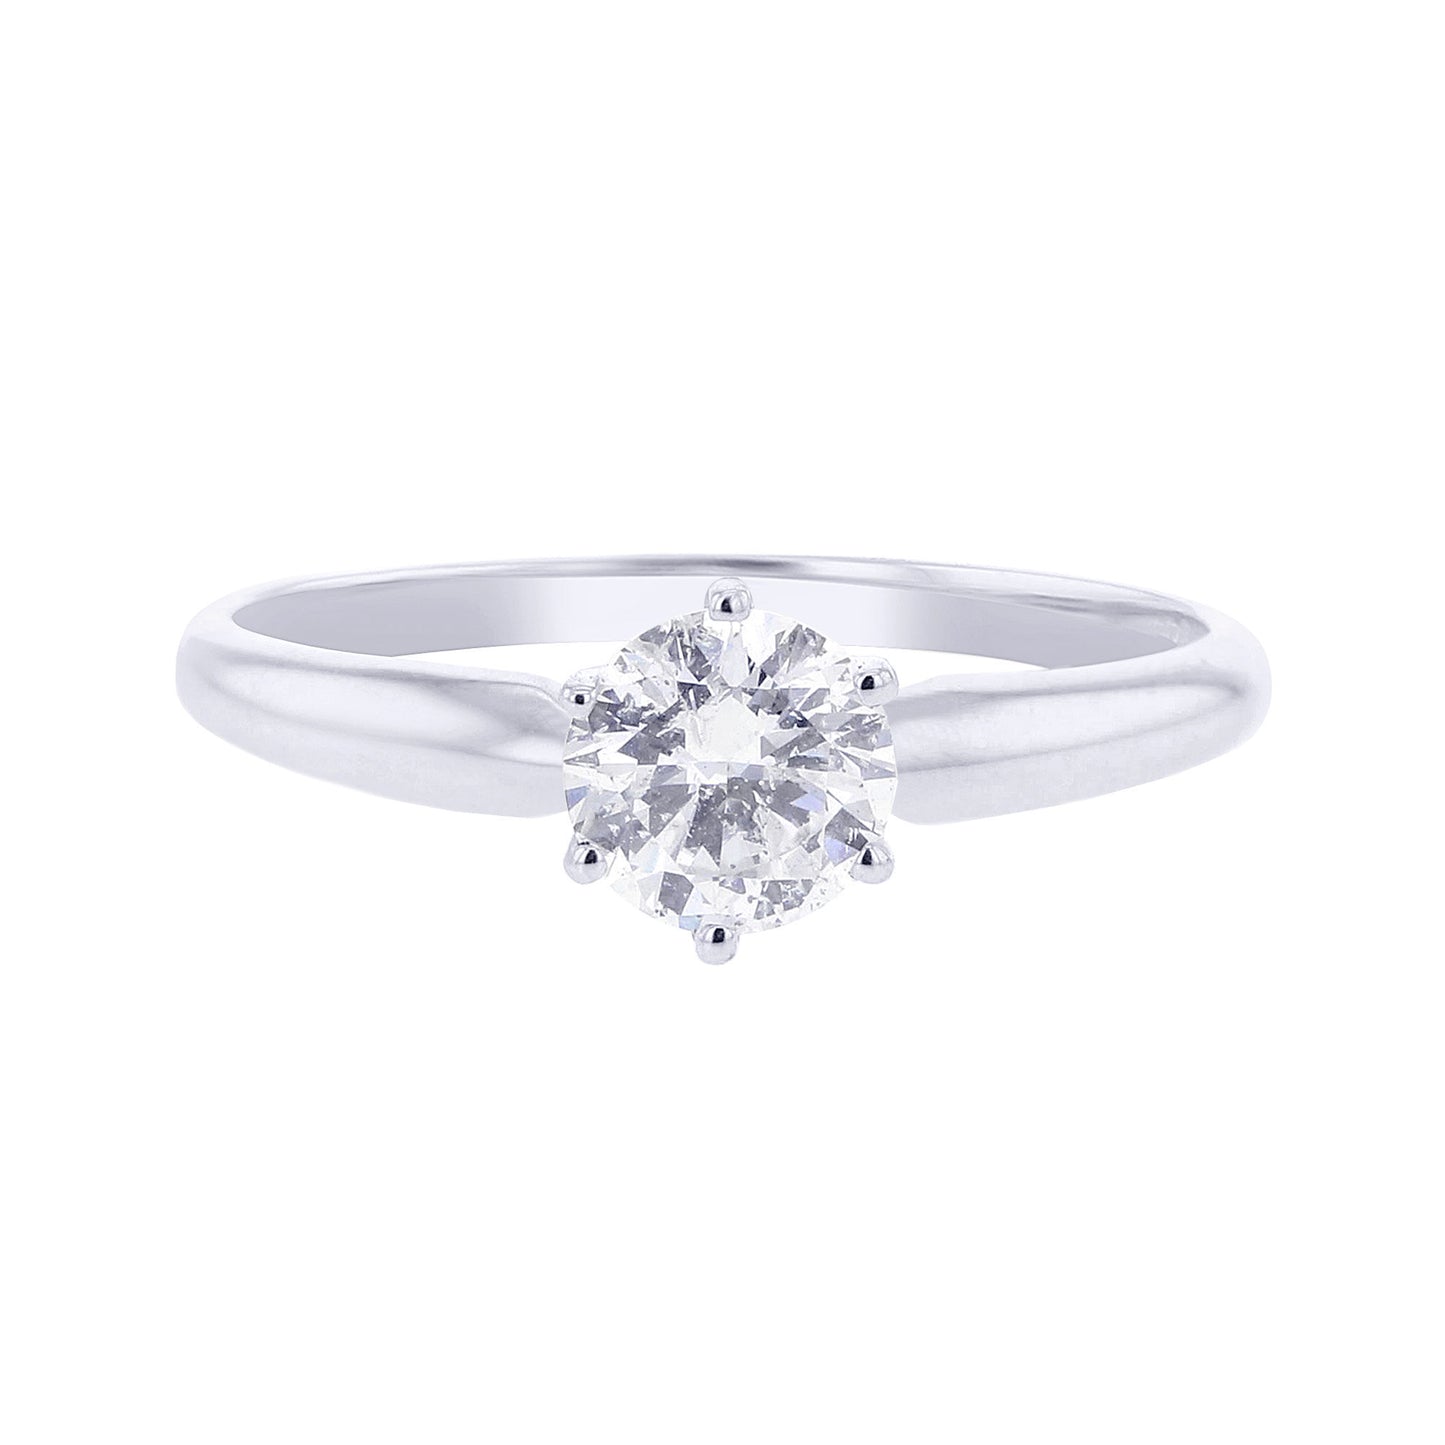 Christa Ready for Love Diamond Engagement Ring 1/2CT